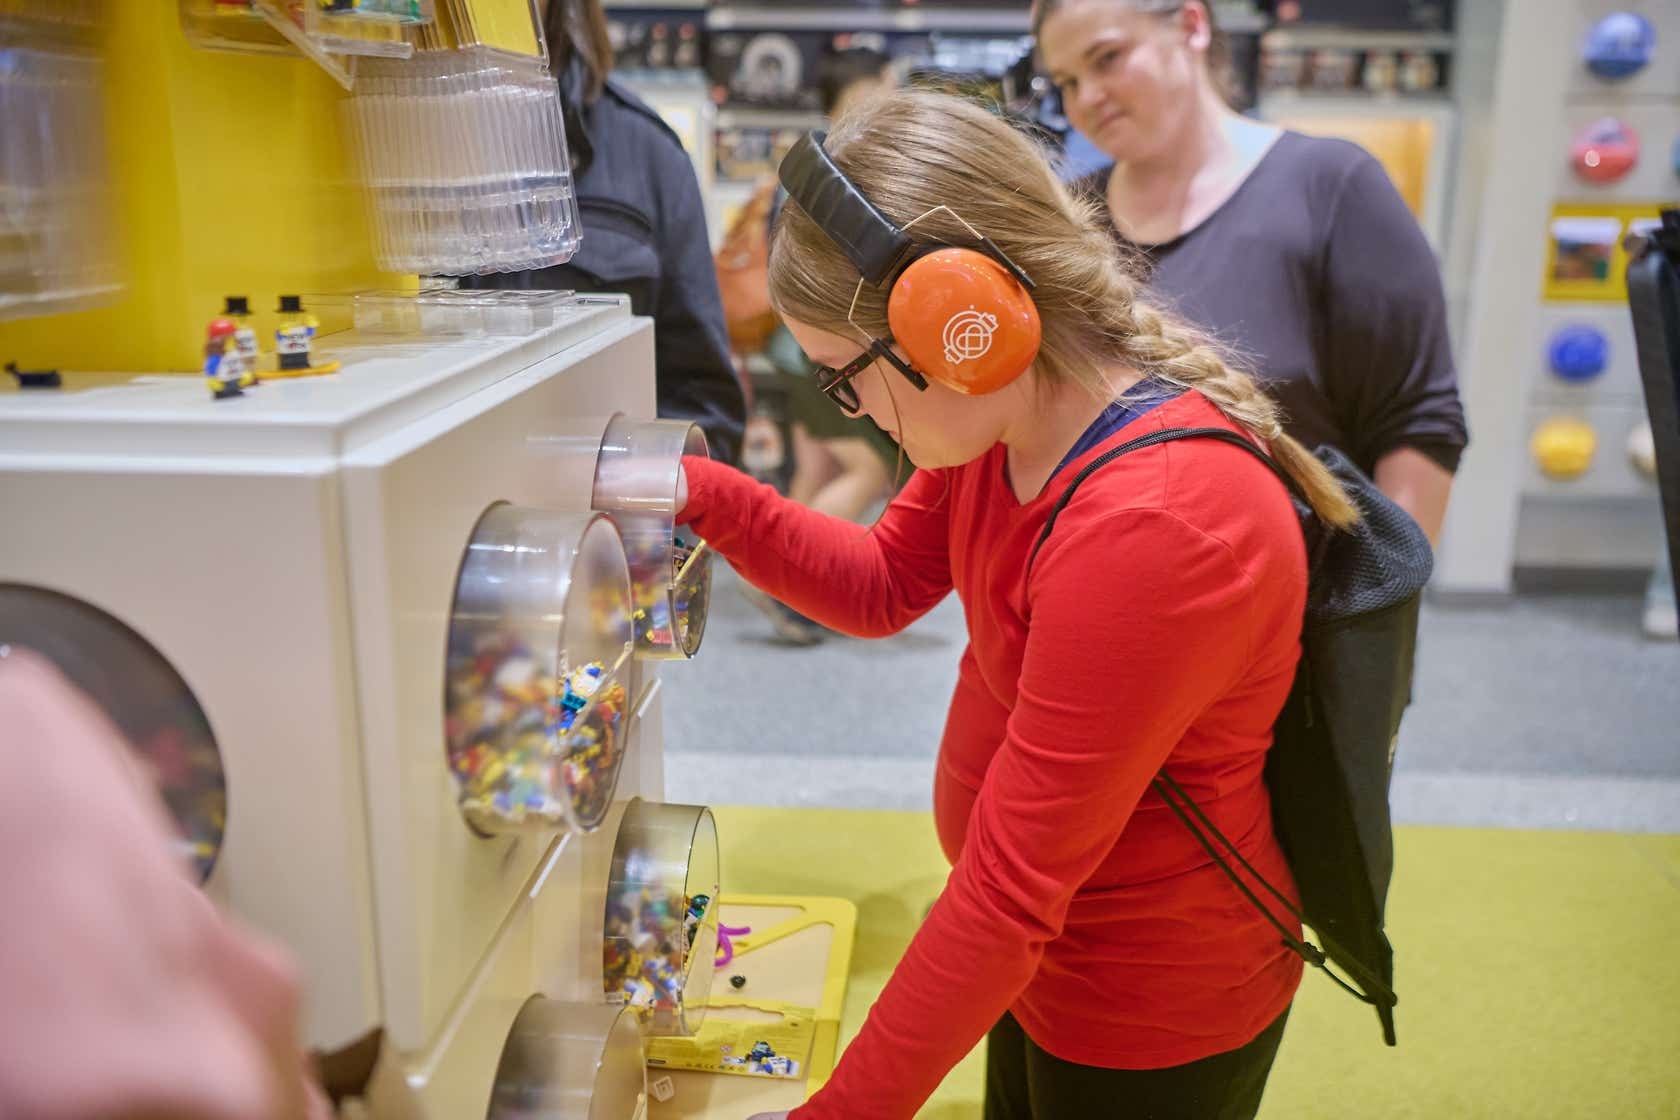 Lego Stores in U.S., Canada to Be “Sensory Inclusive”